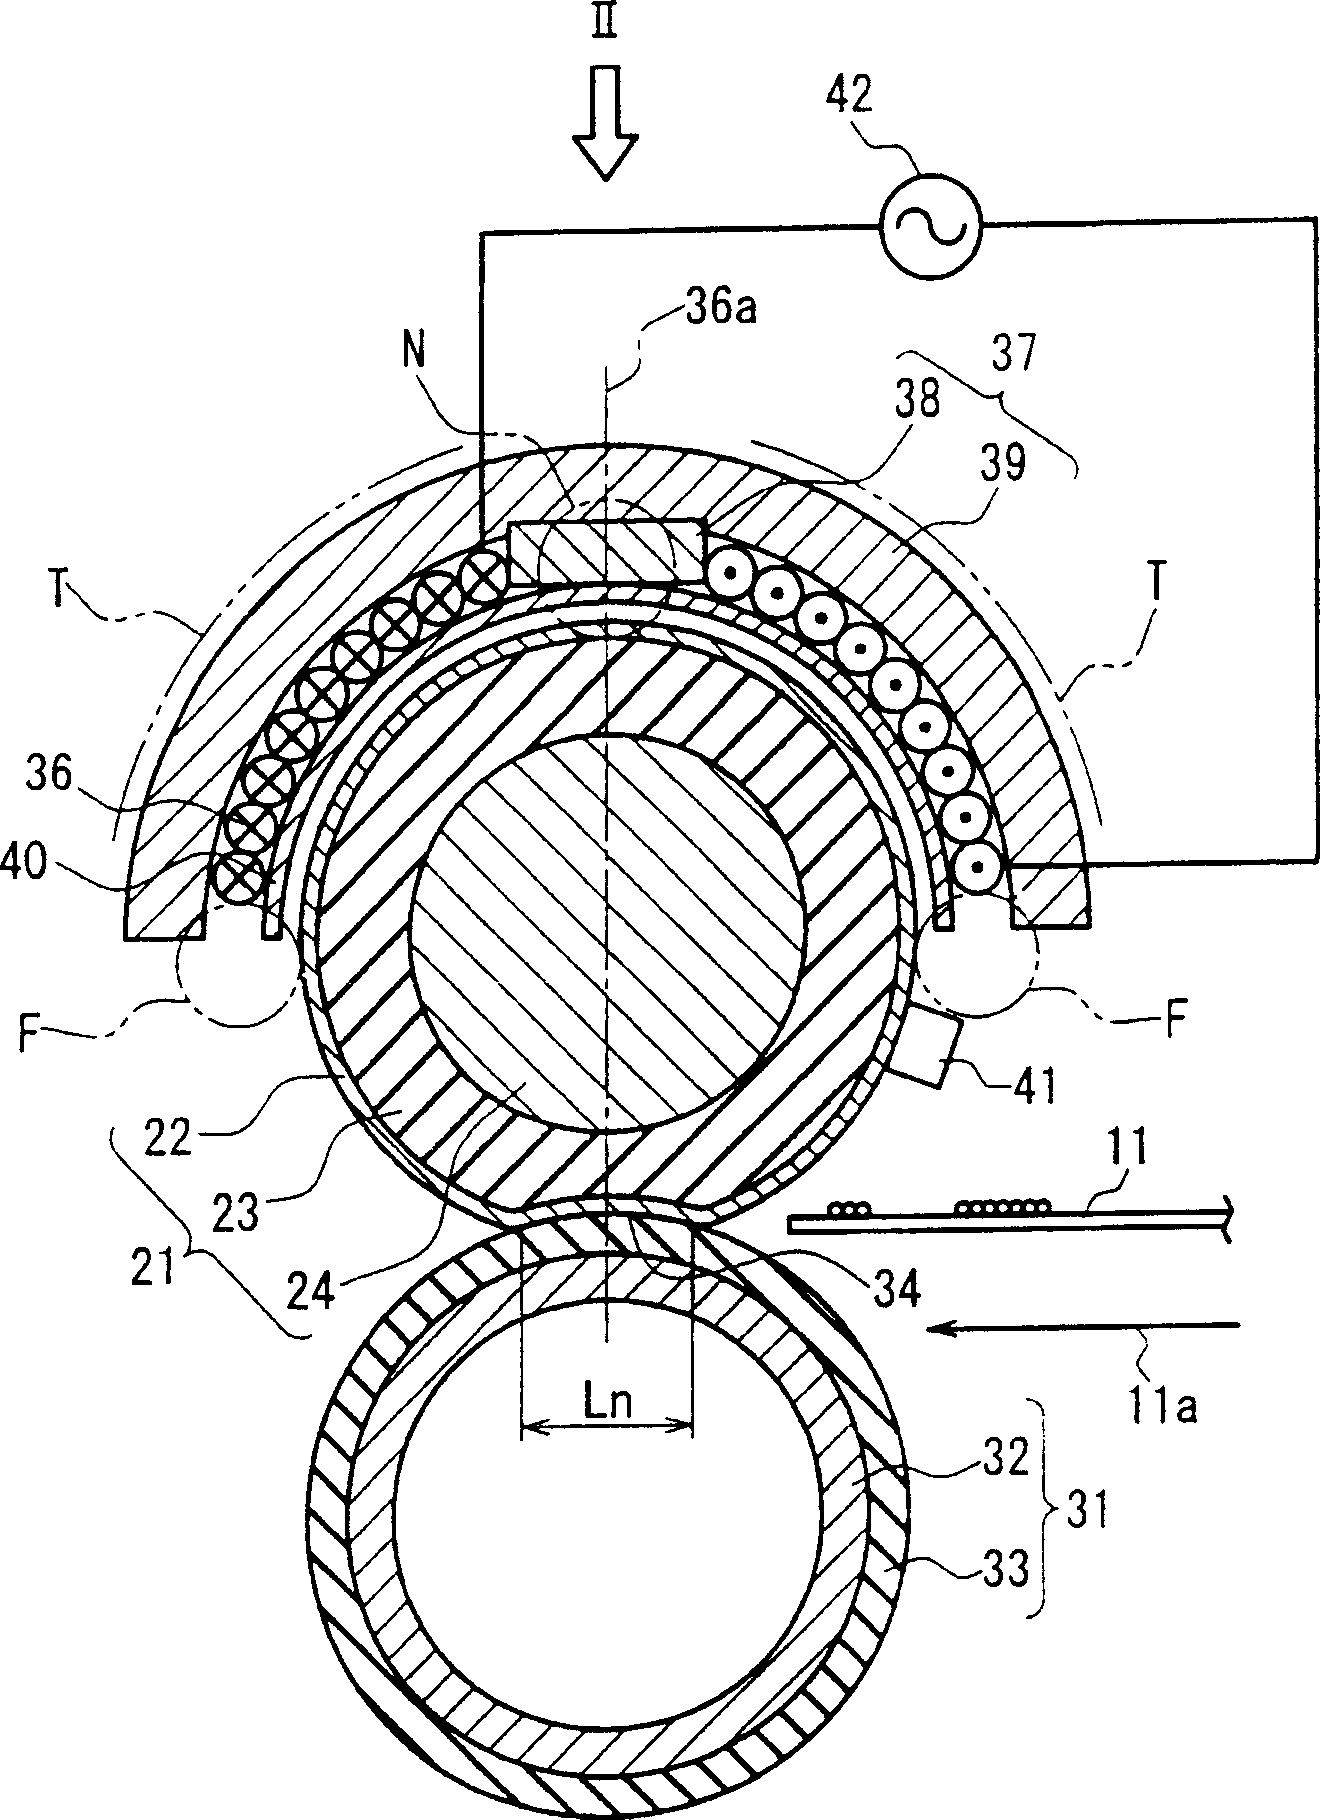 Heating roller, image heating apparatus, and image forming apparatus